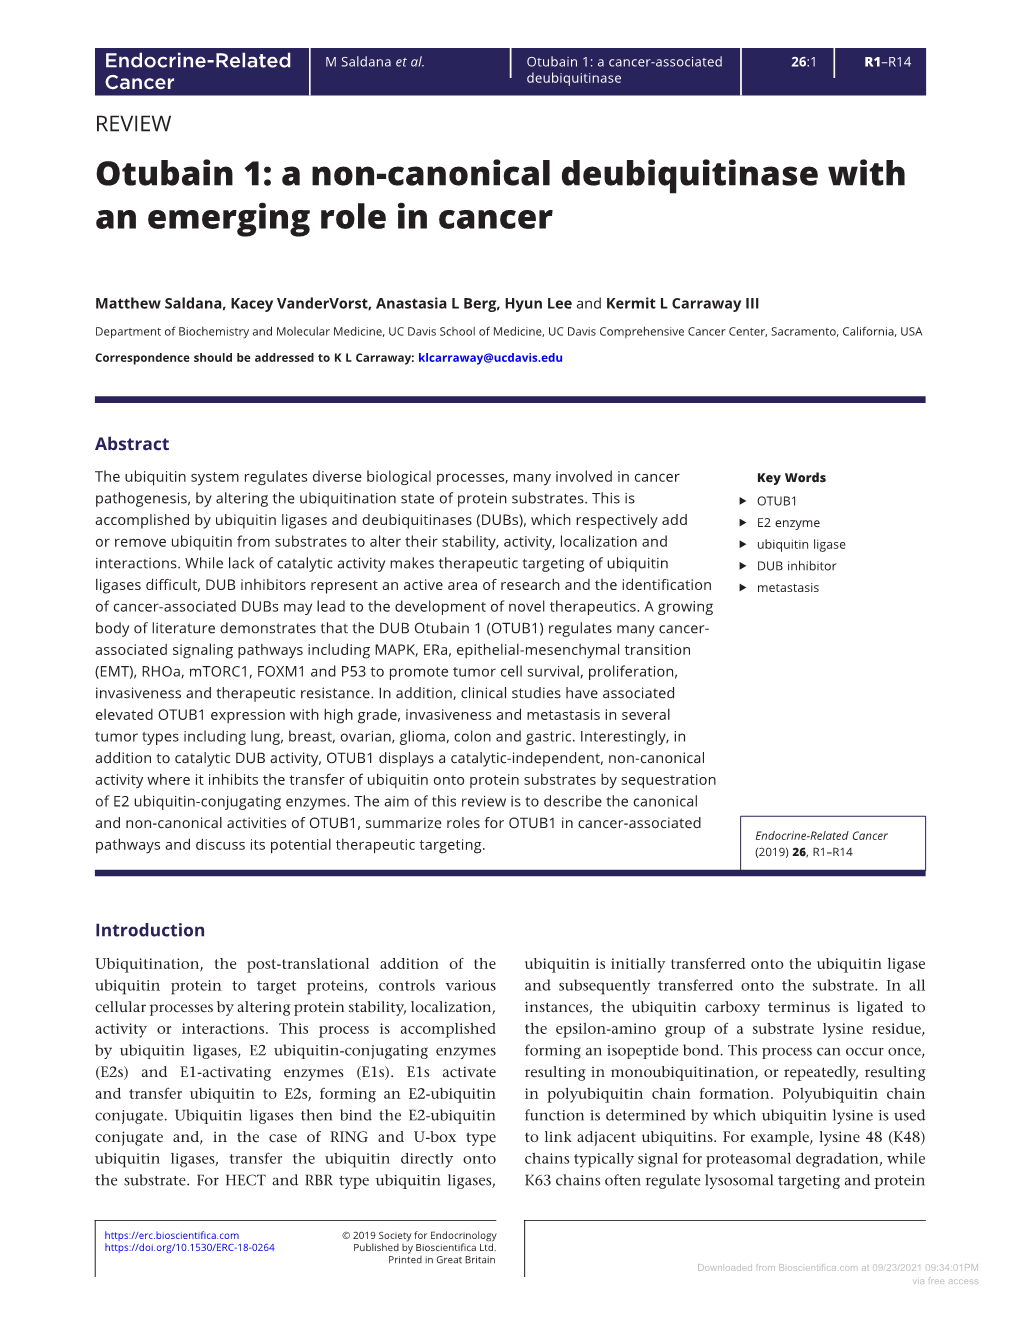 Otubain 1: a Cancer-Associated 26:1 R1–R14 Cancer Deubiquitinase REVIEW Otubain 1: a Non-Canonical Deubiquitinase with an Emerging Role in Cancer